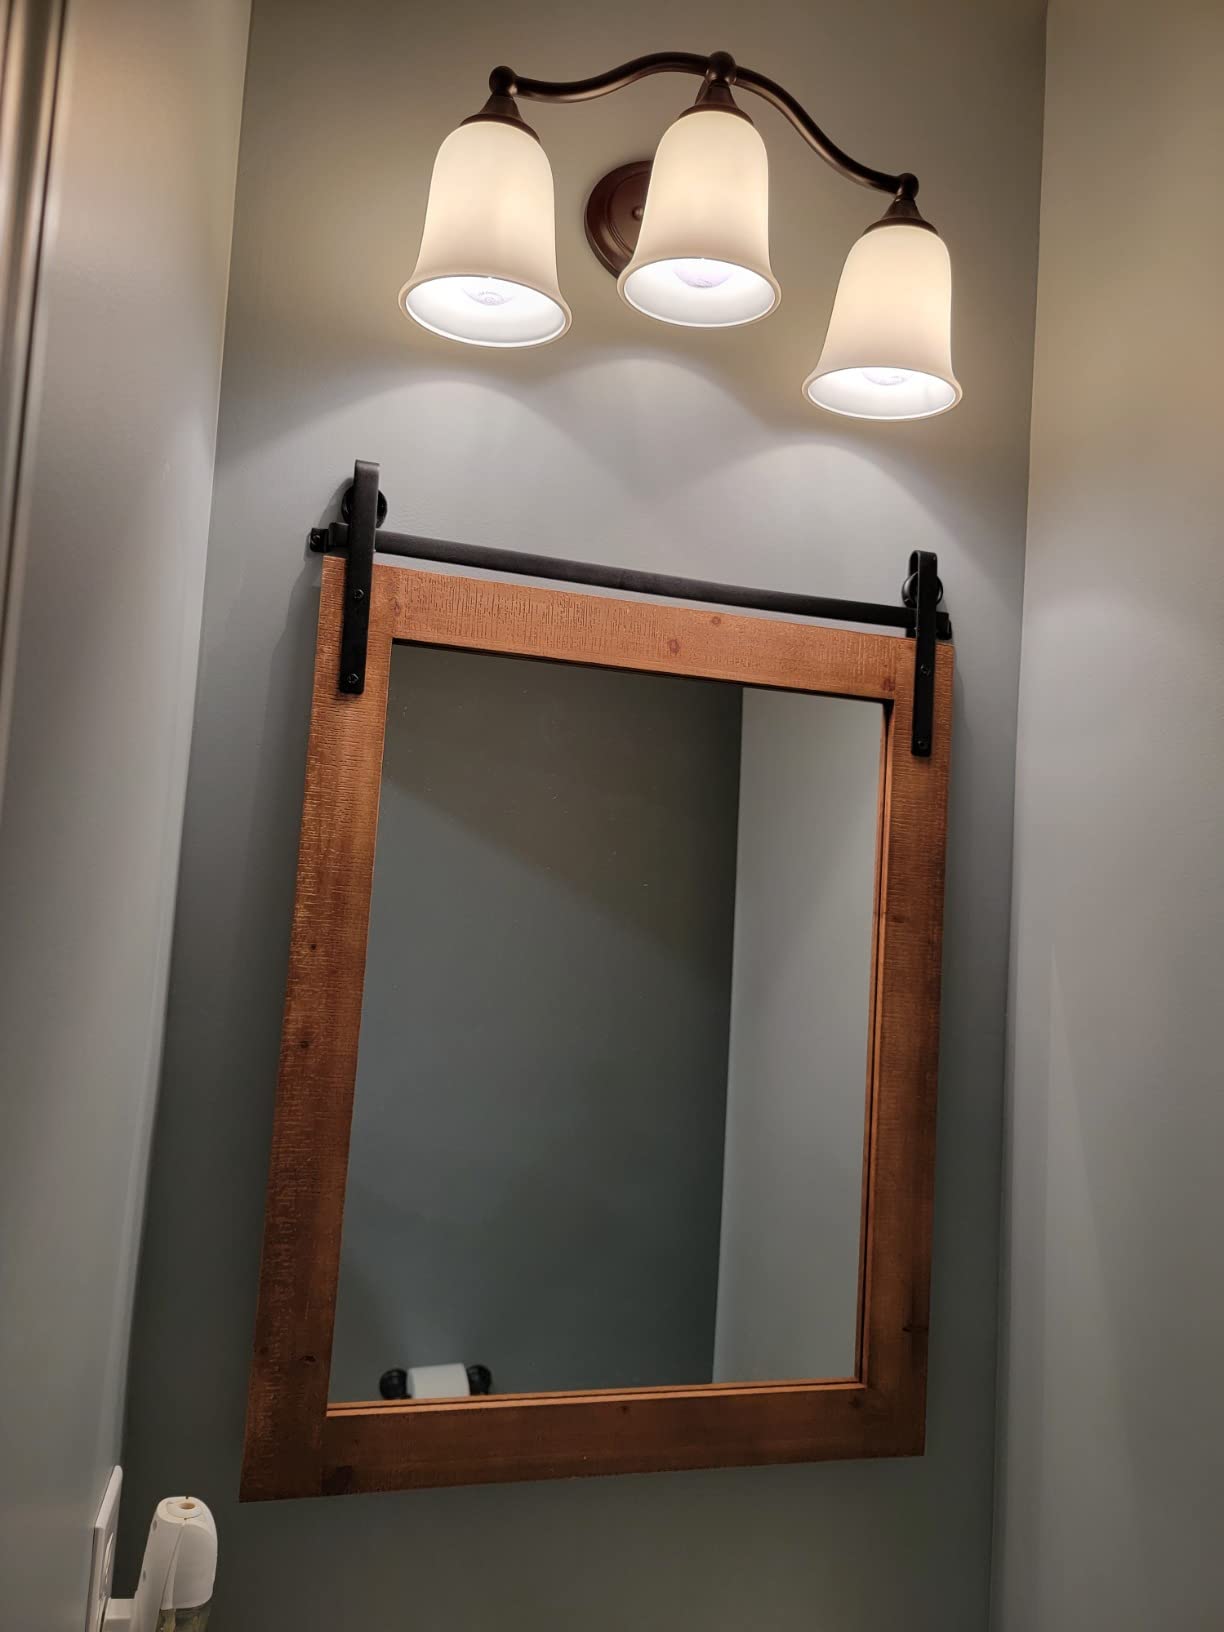 Great mirror for powder room